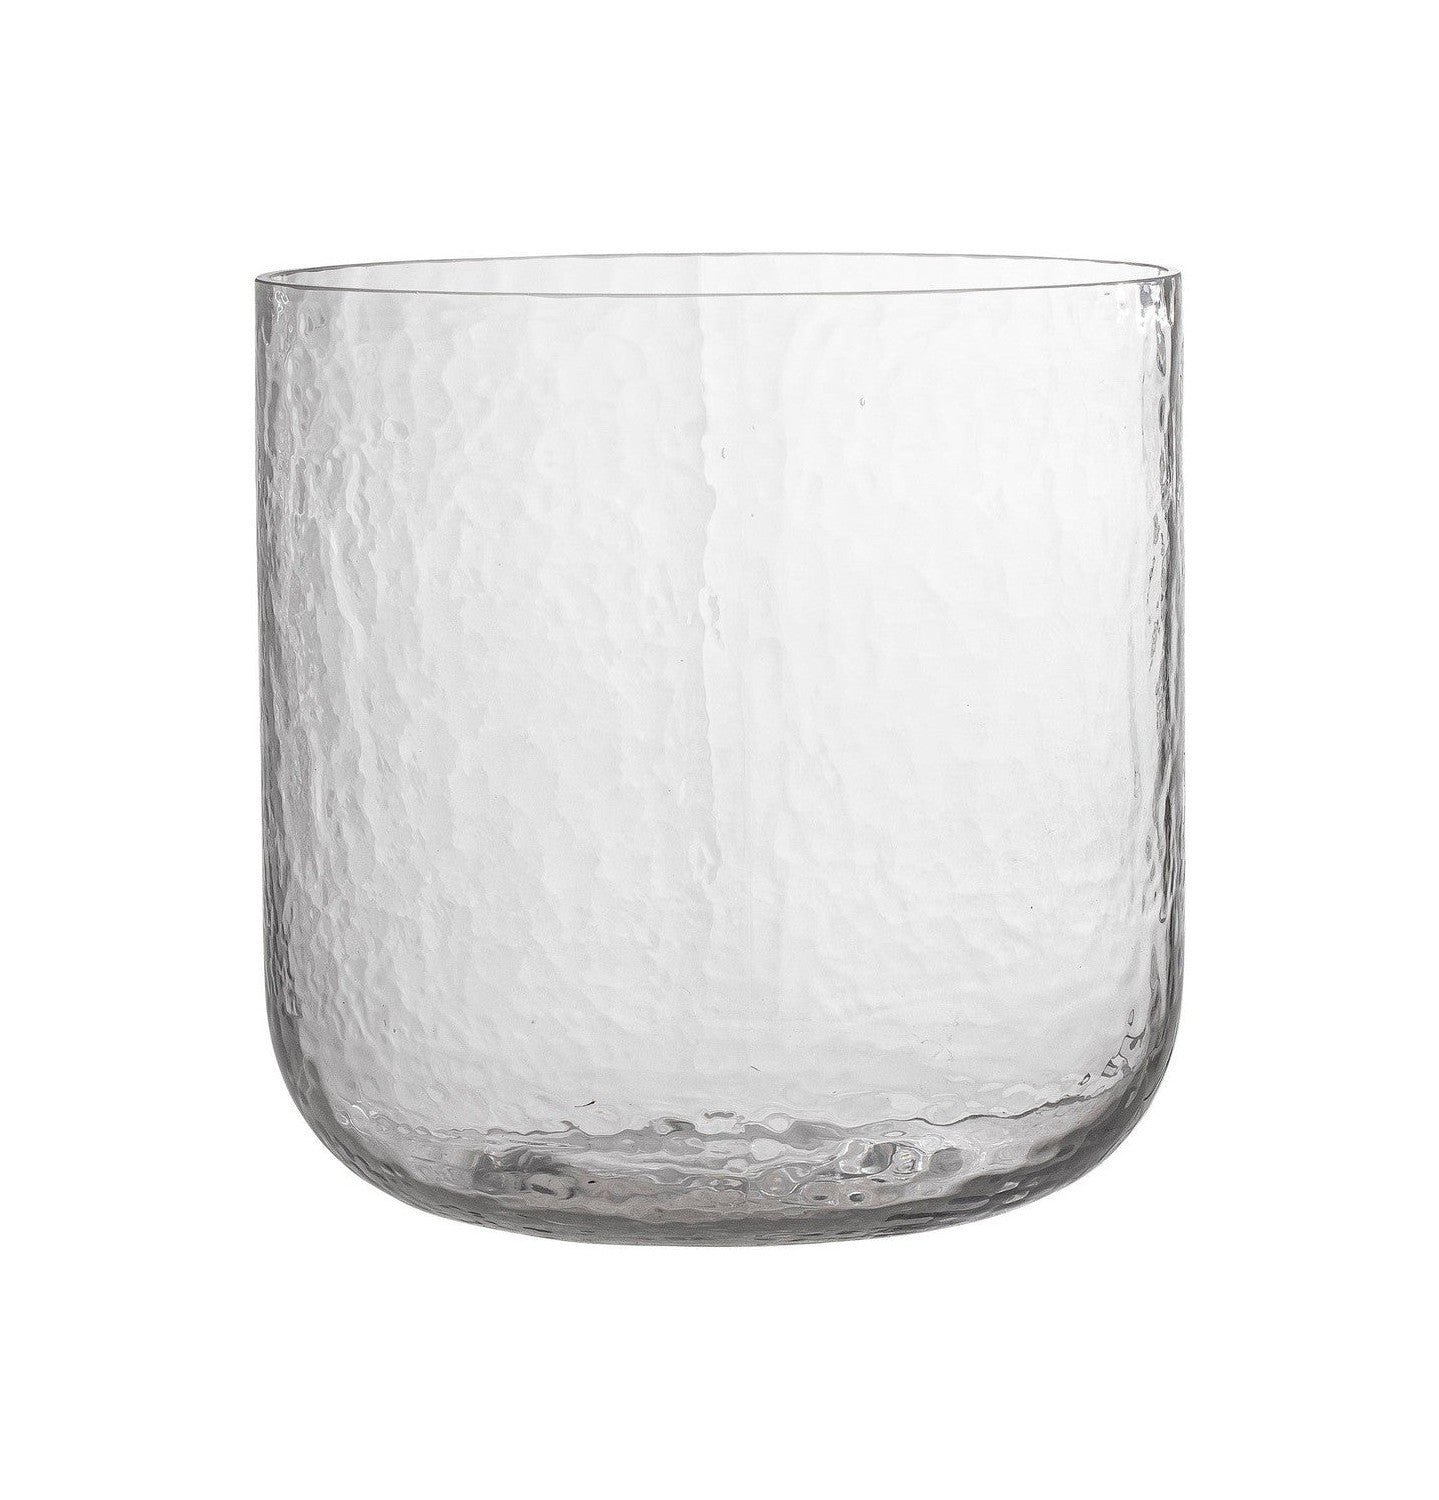 Bloomingville Didda Vase, Clear, Glass